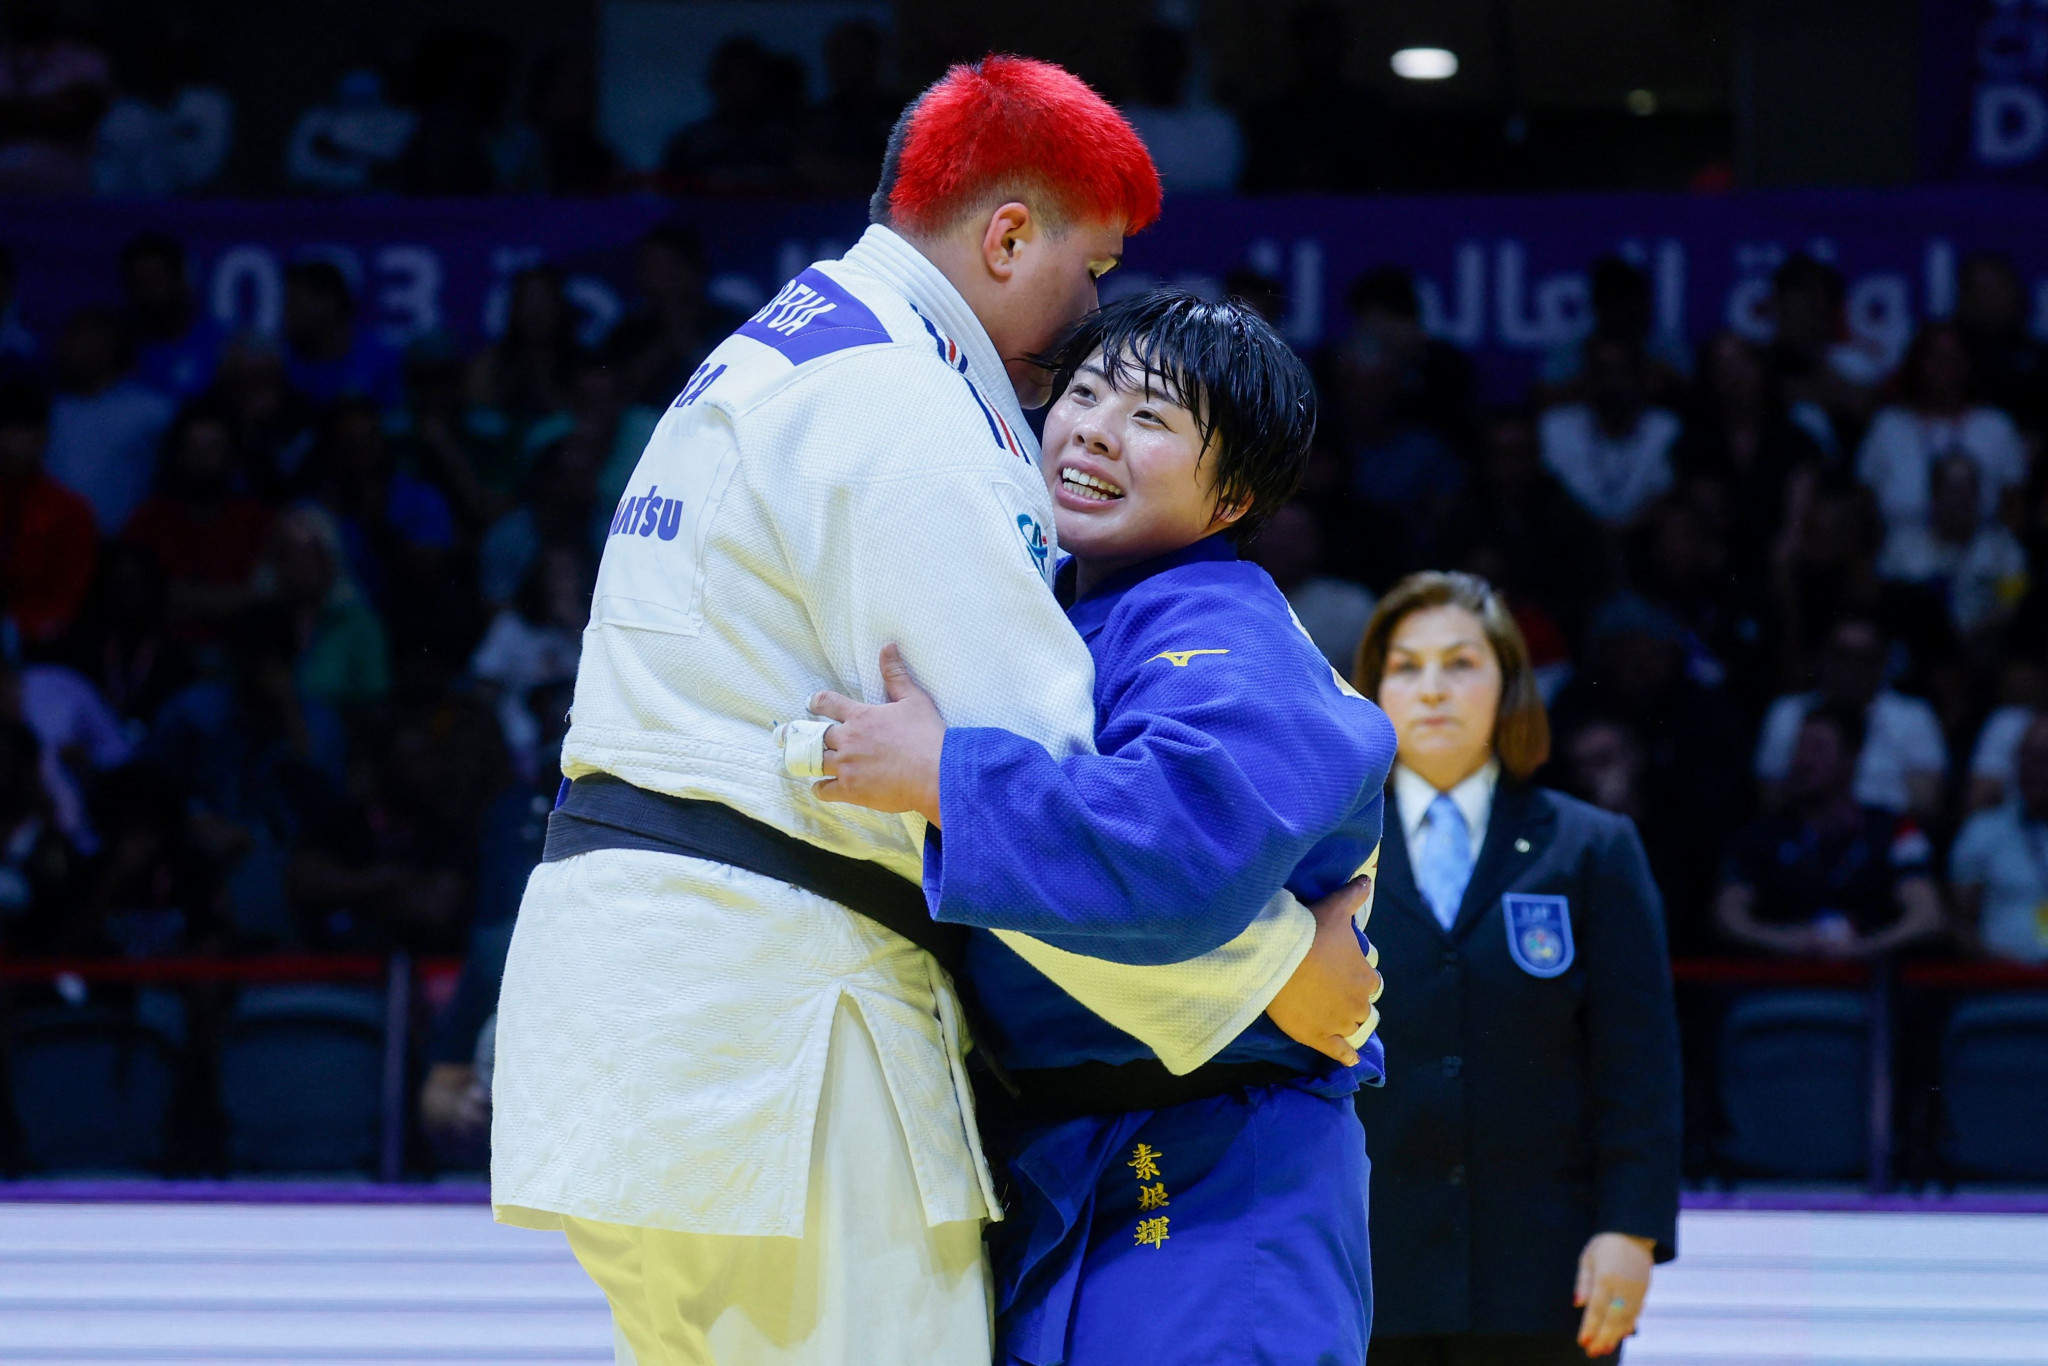 Japan’s Akira Sone, right, defeated Julia Tolofua, left, of France to win women's over-78kg gold ©Getty Images